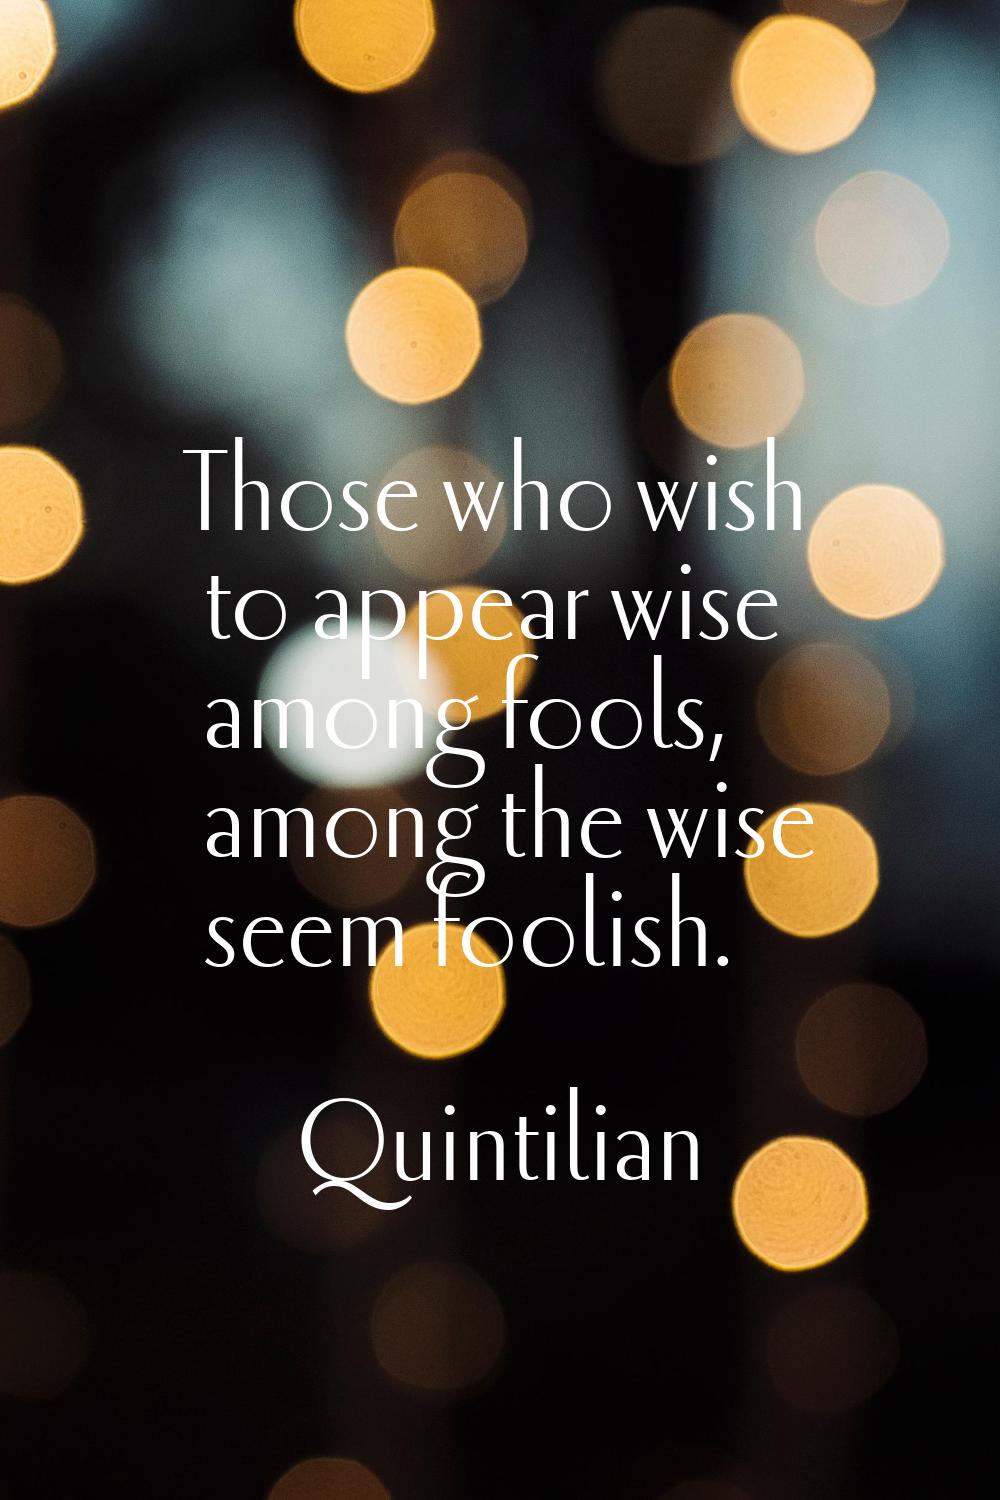 Those who wish to appear wise among fools, among the wise seem foolish.